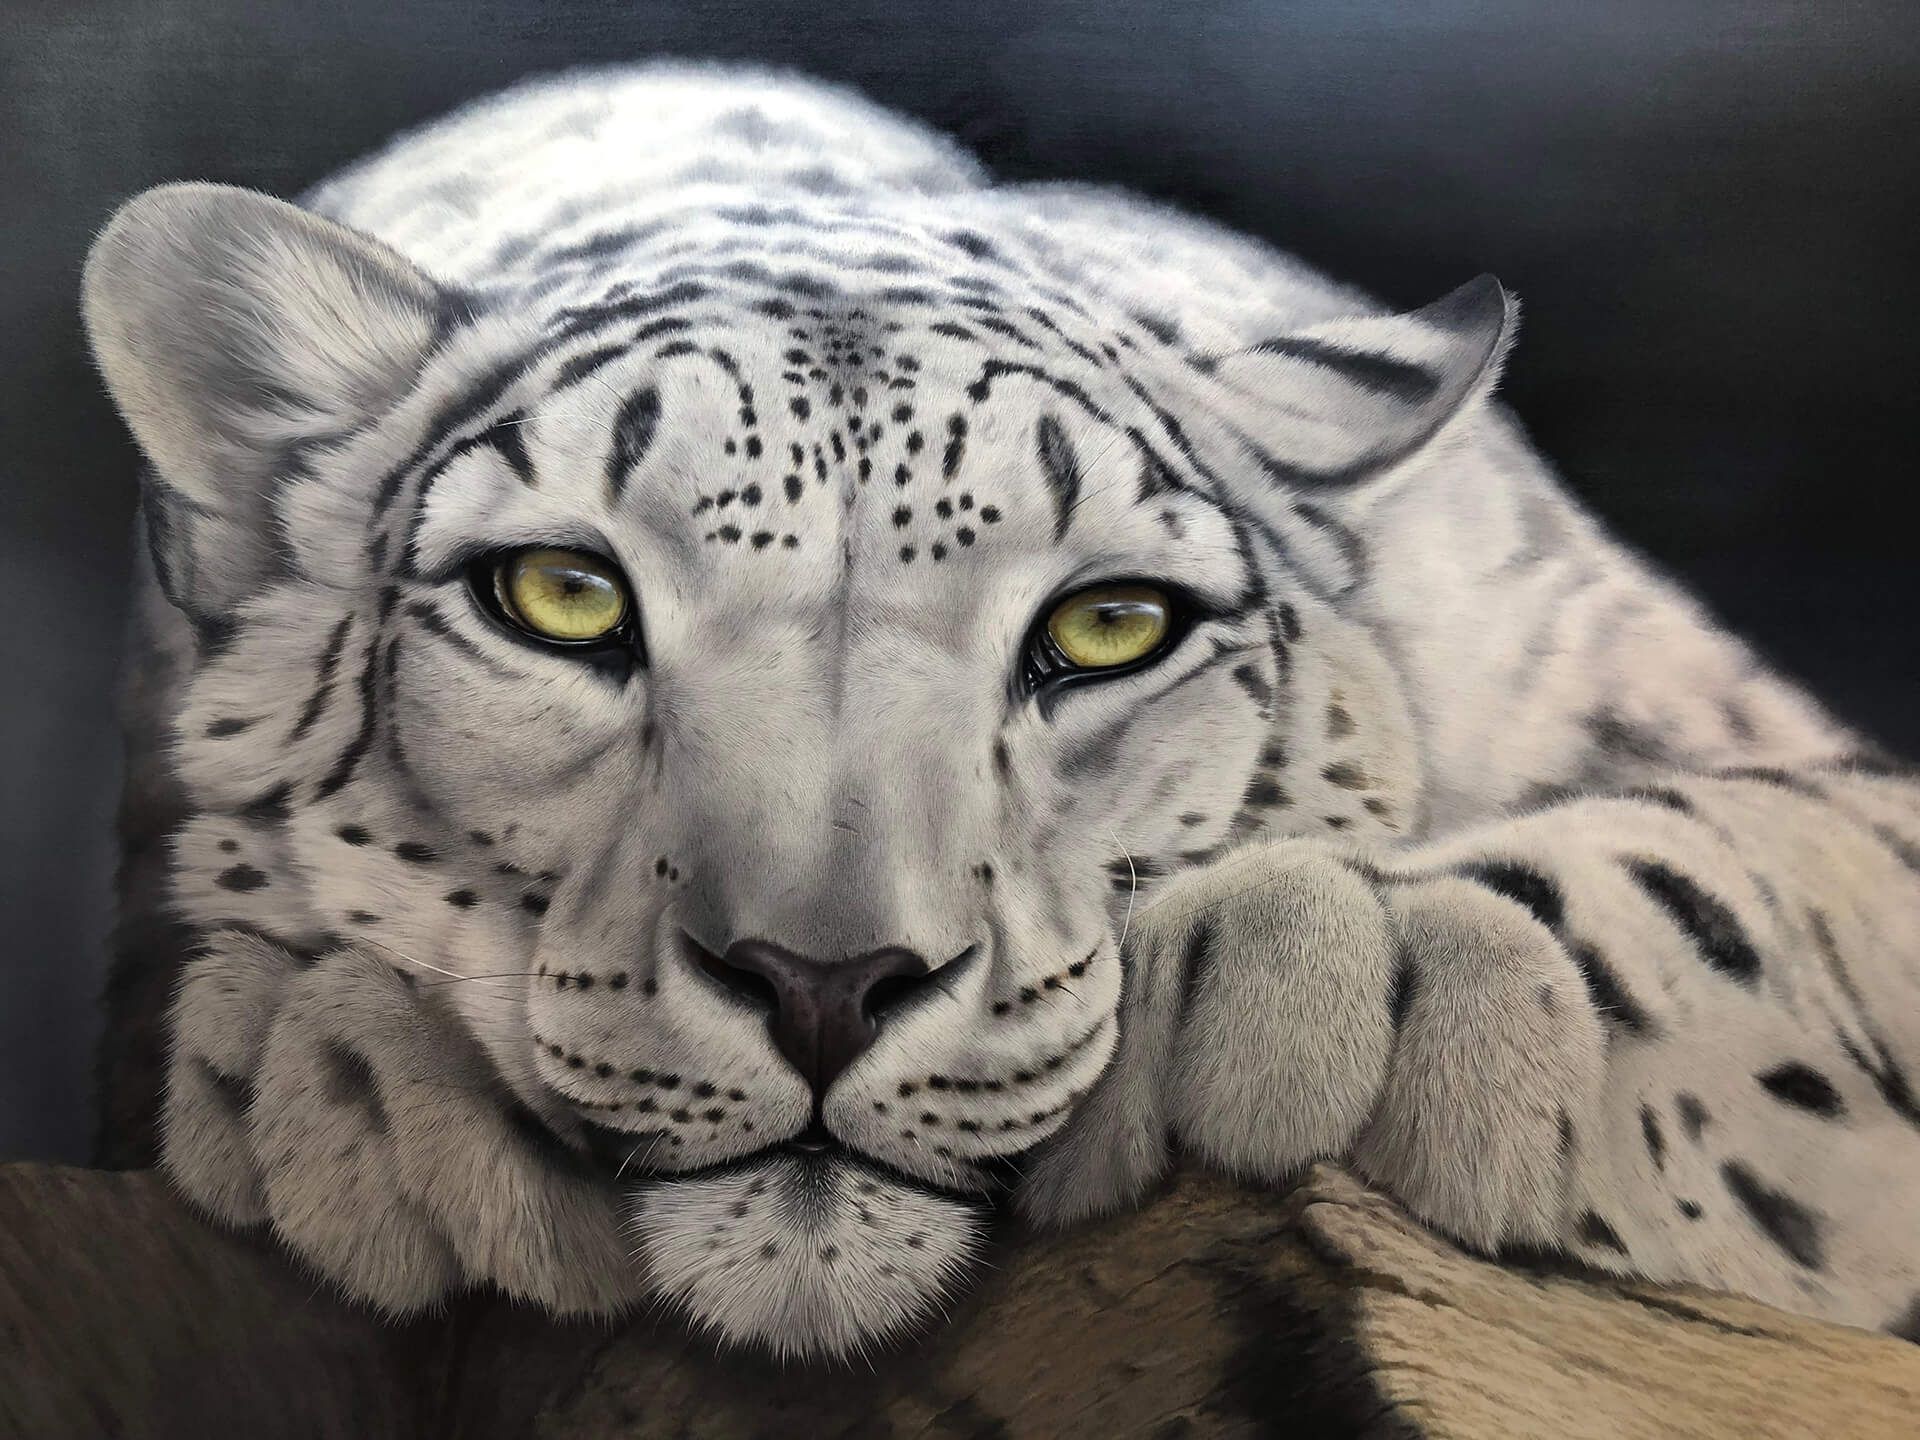 Photorealistic painting of a close up of a snow leapard